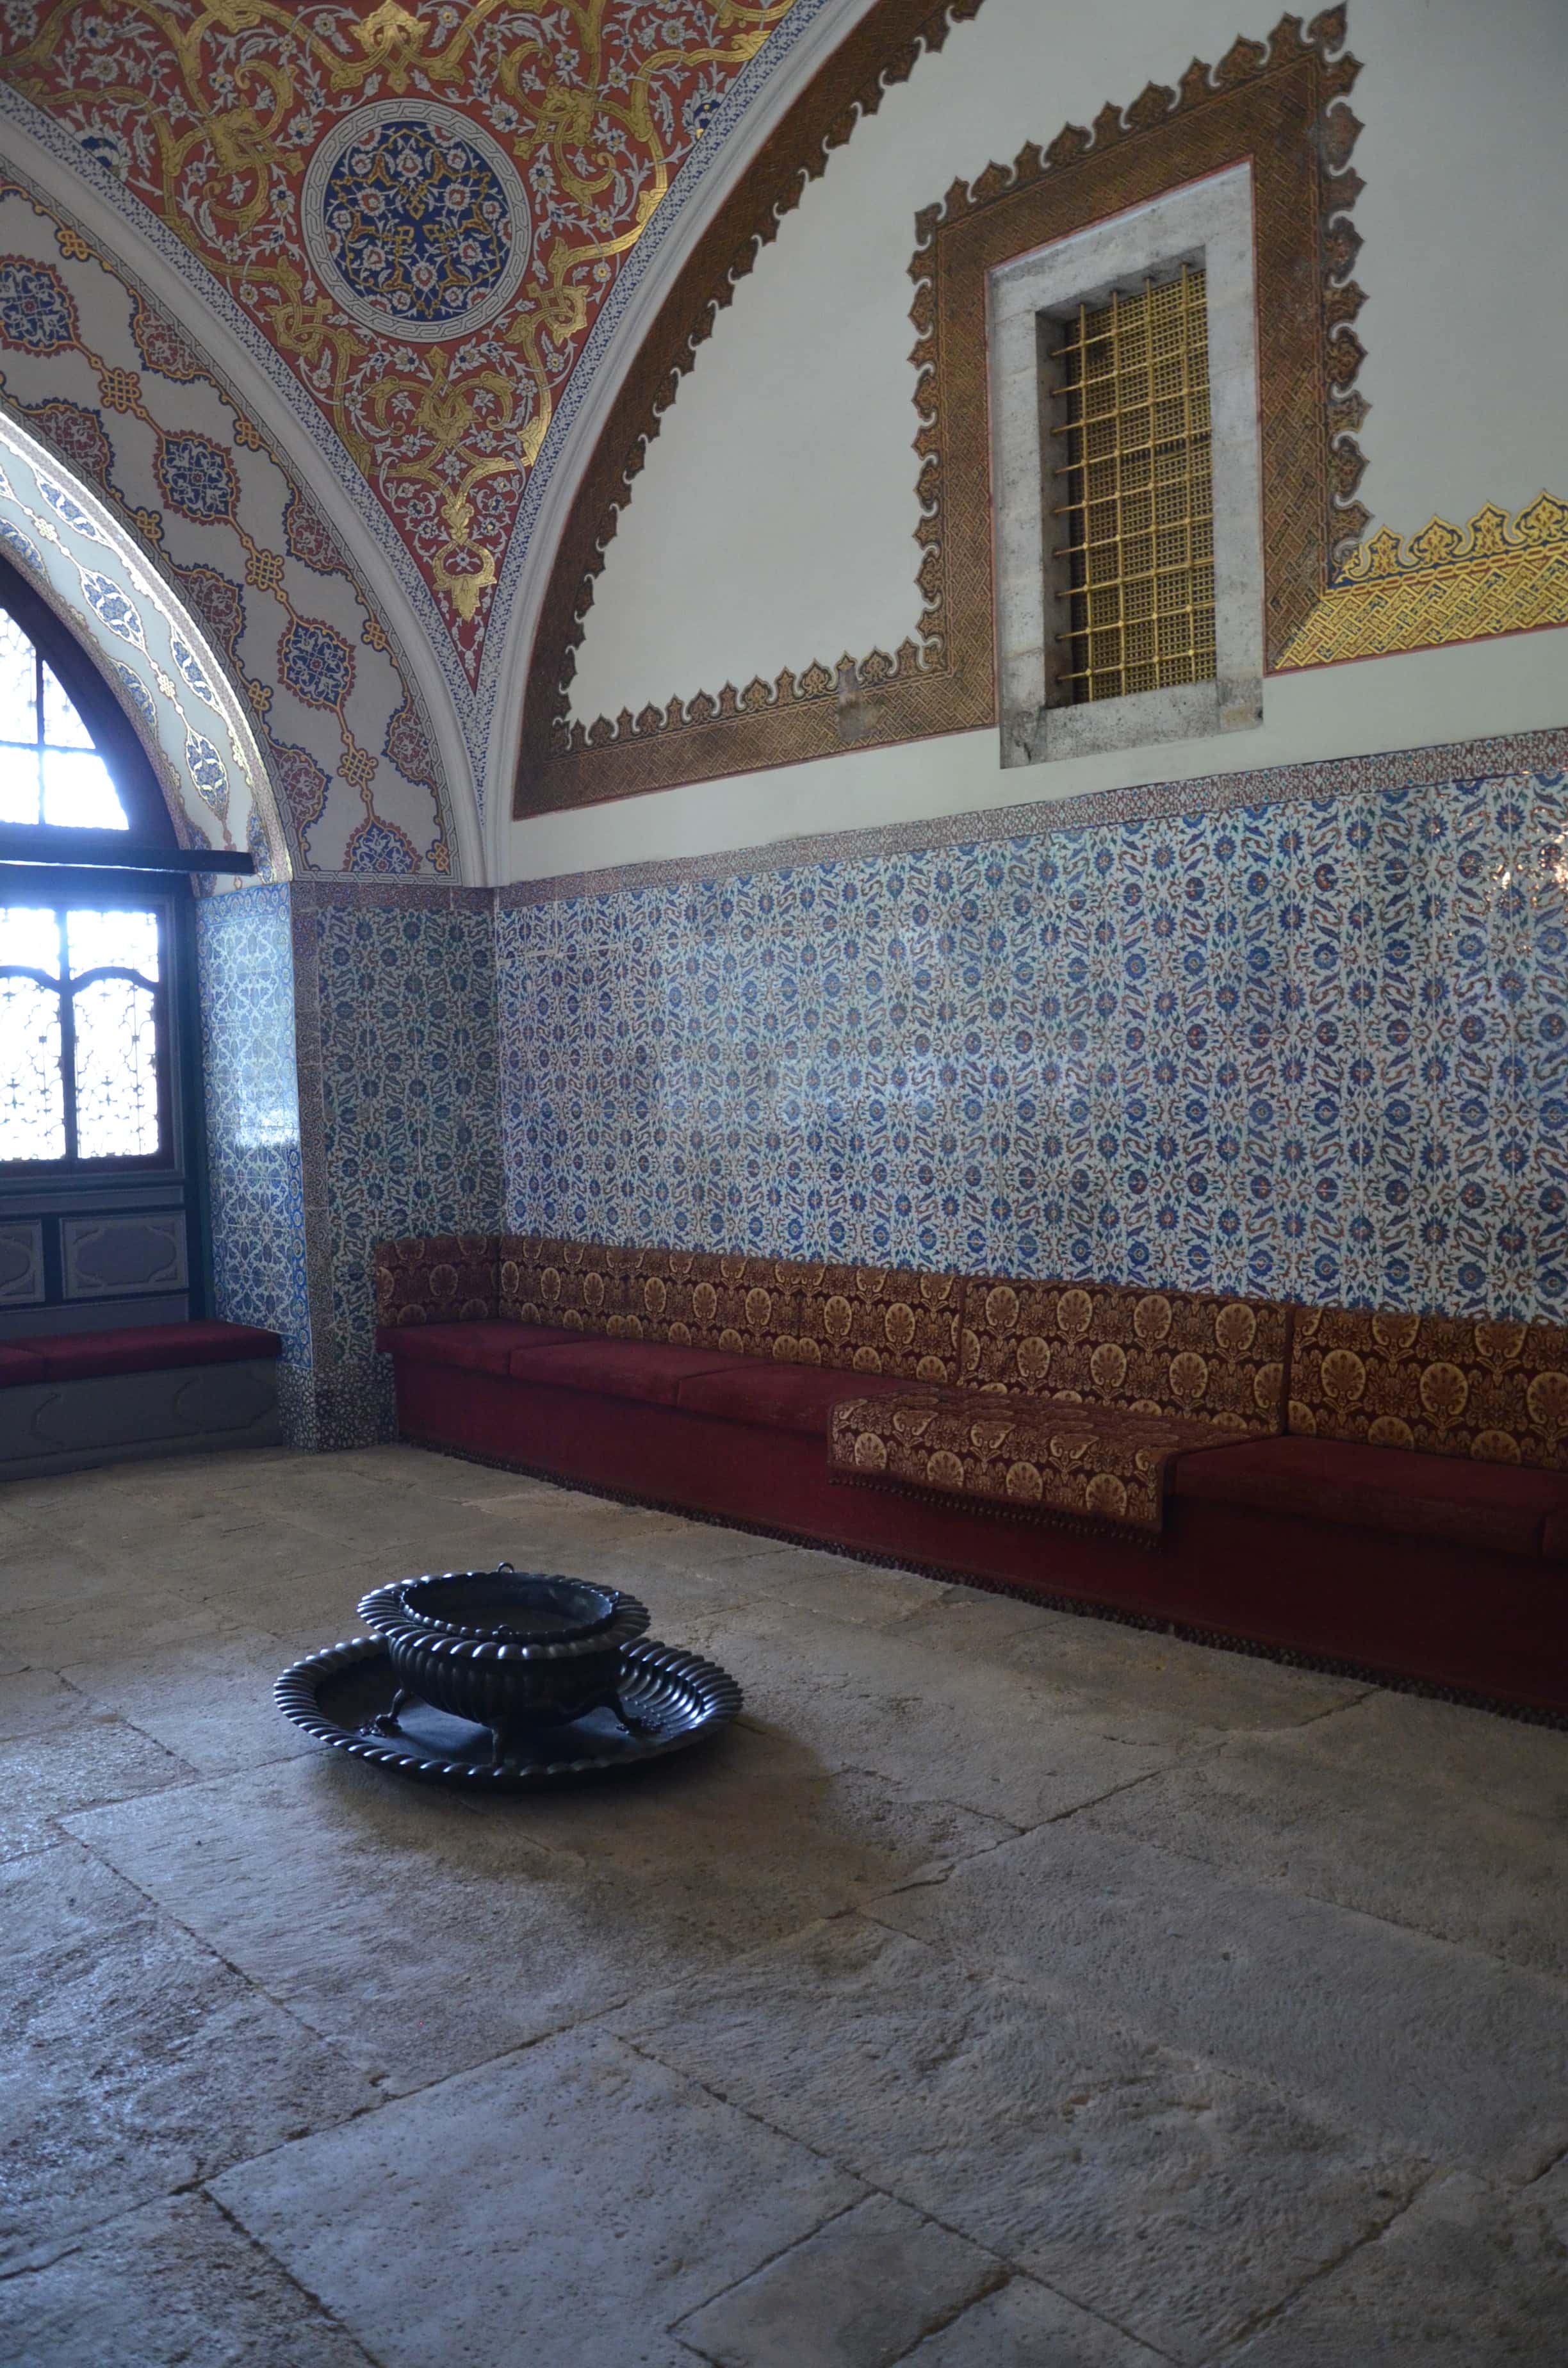 Council Hall with the golden window above at the Imperial Council at Topkapi Palace in Istanbul, Turkey